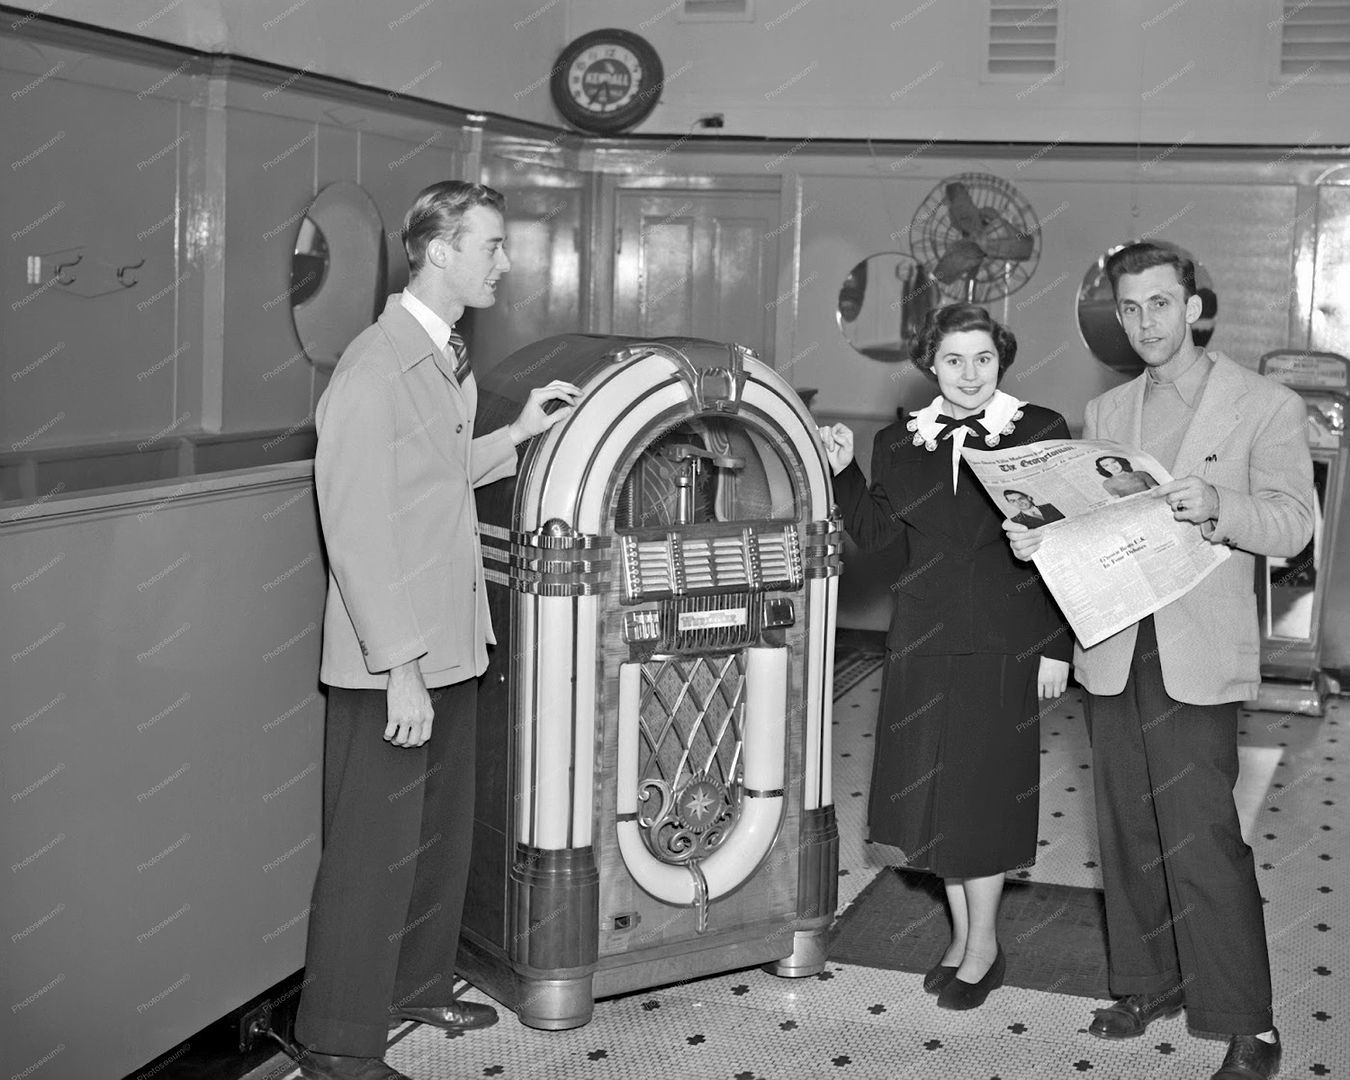  photo group standing next to a jukeboxgs21948.jpg